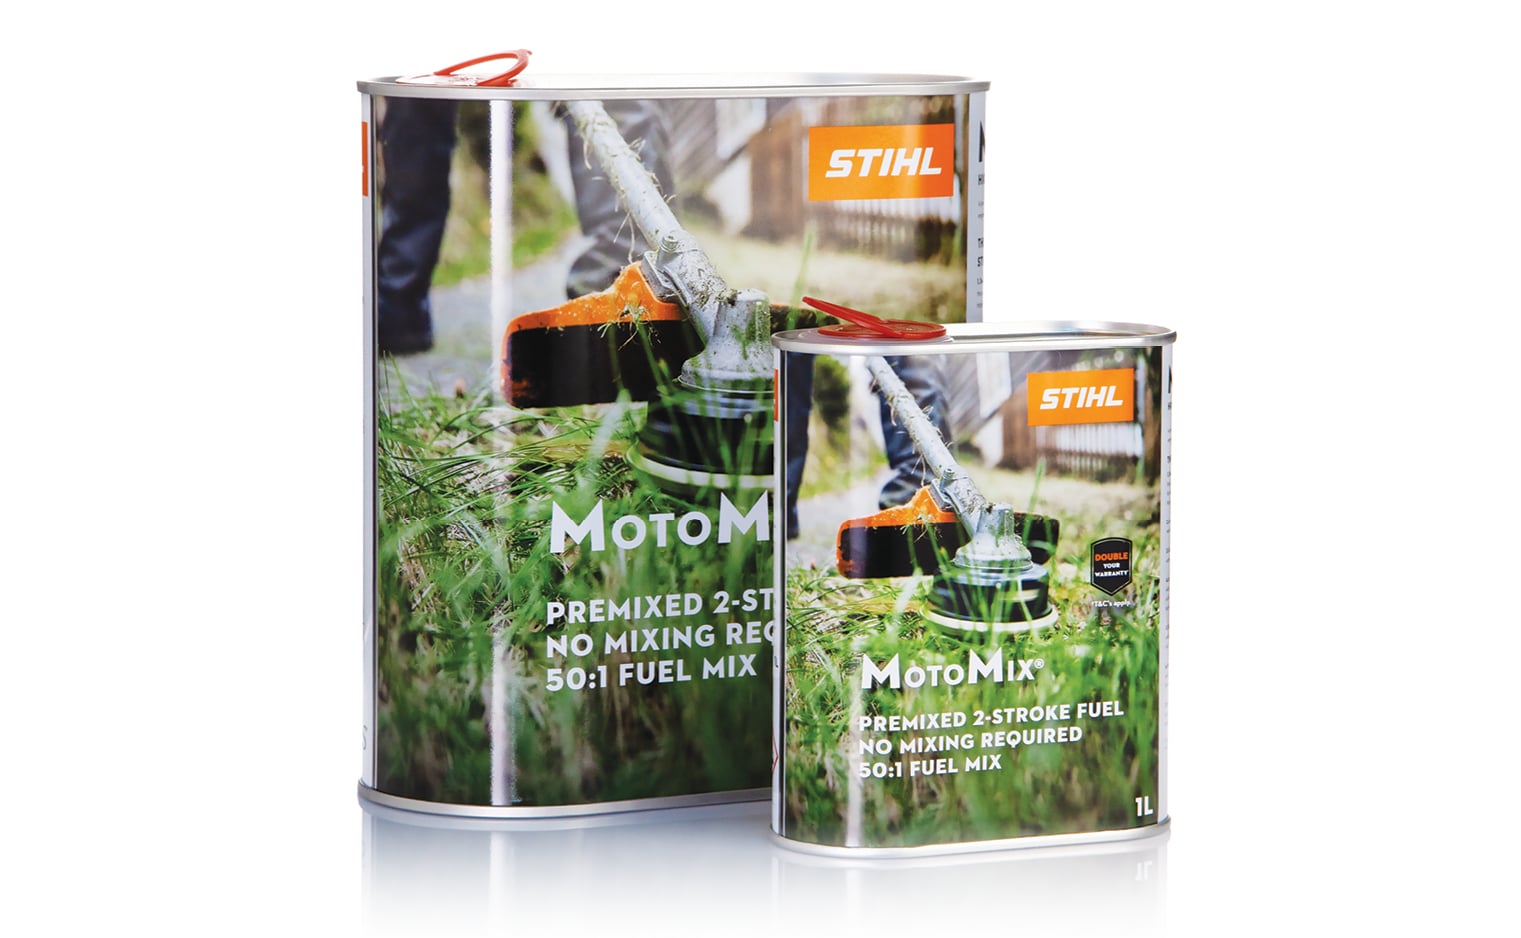 STIHL - Why use Motomix? STIHL MotoMix has a shelf life of two years once  opened, its better for the environment and will improve your engine's  protection and performance. New to the